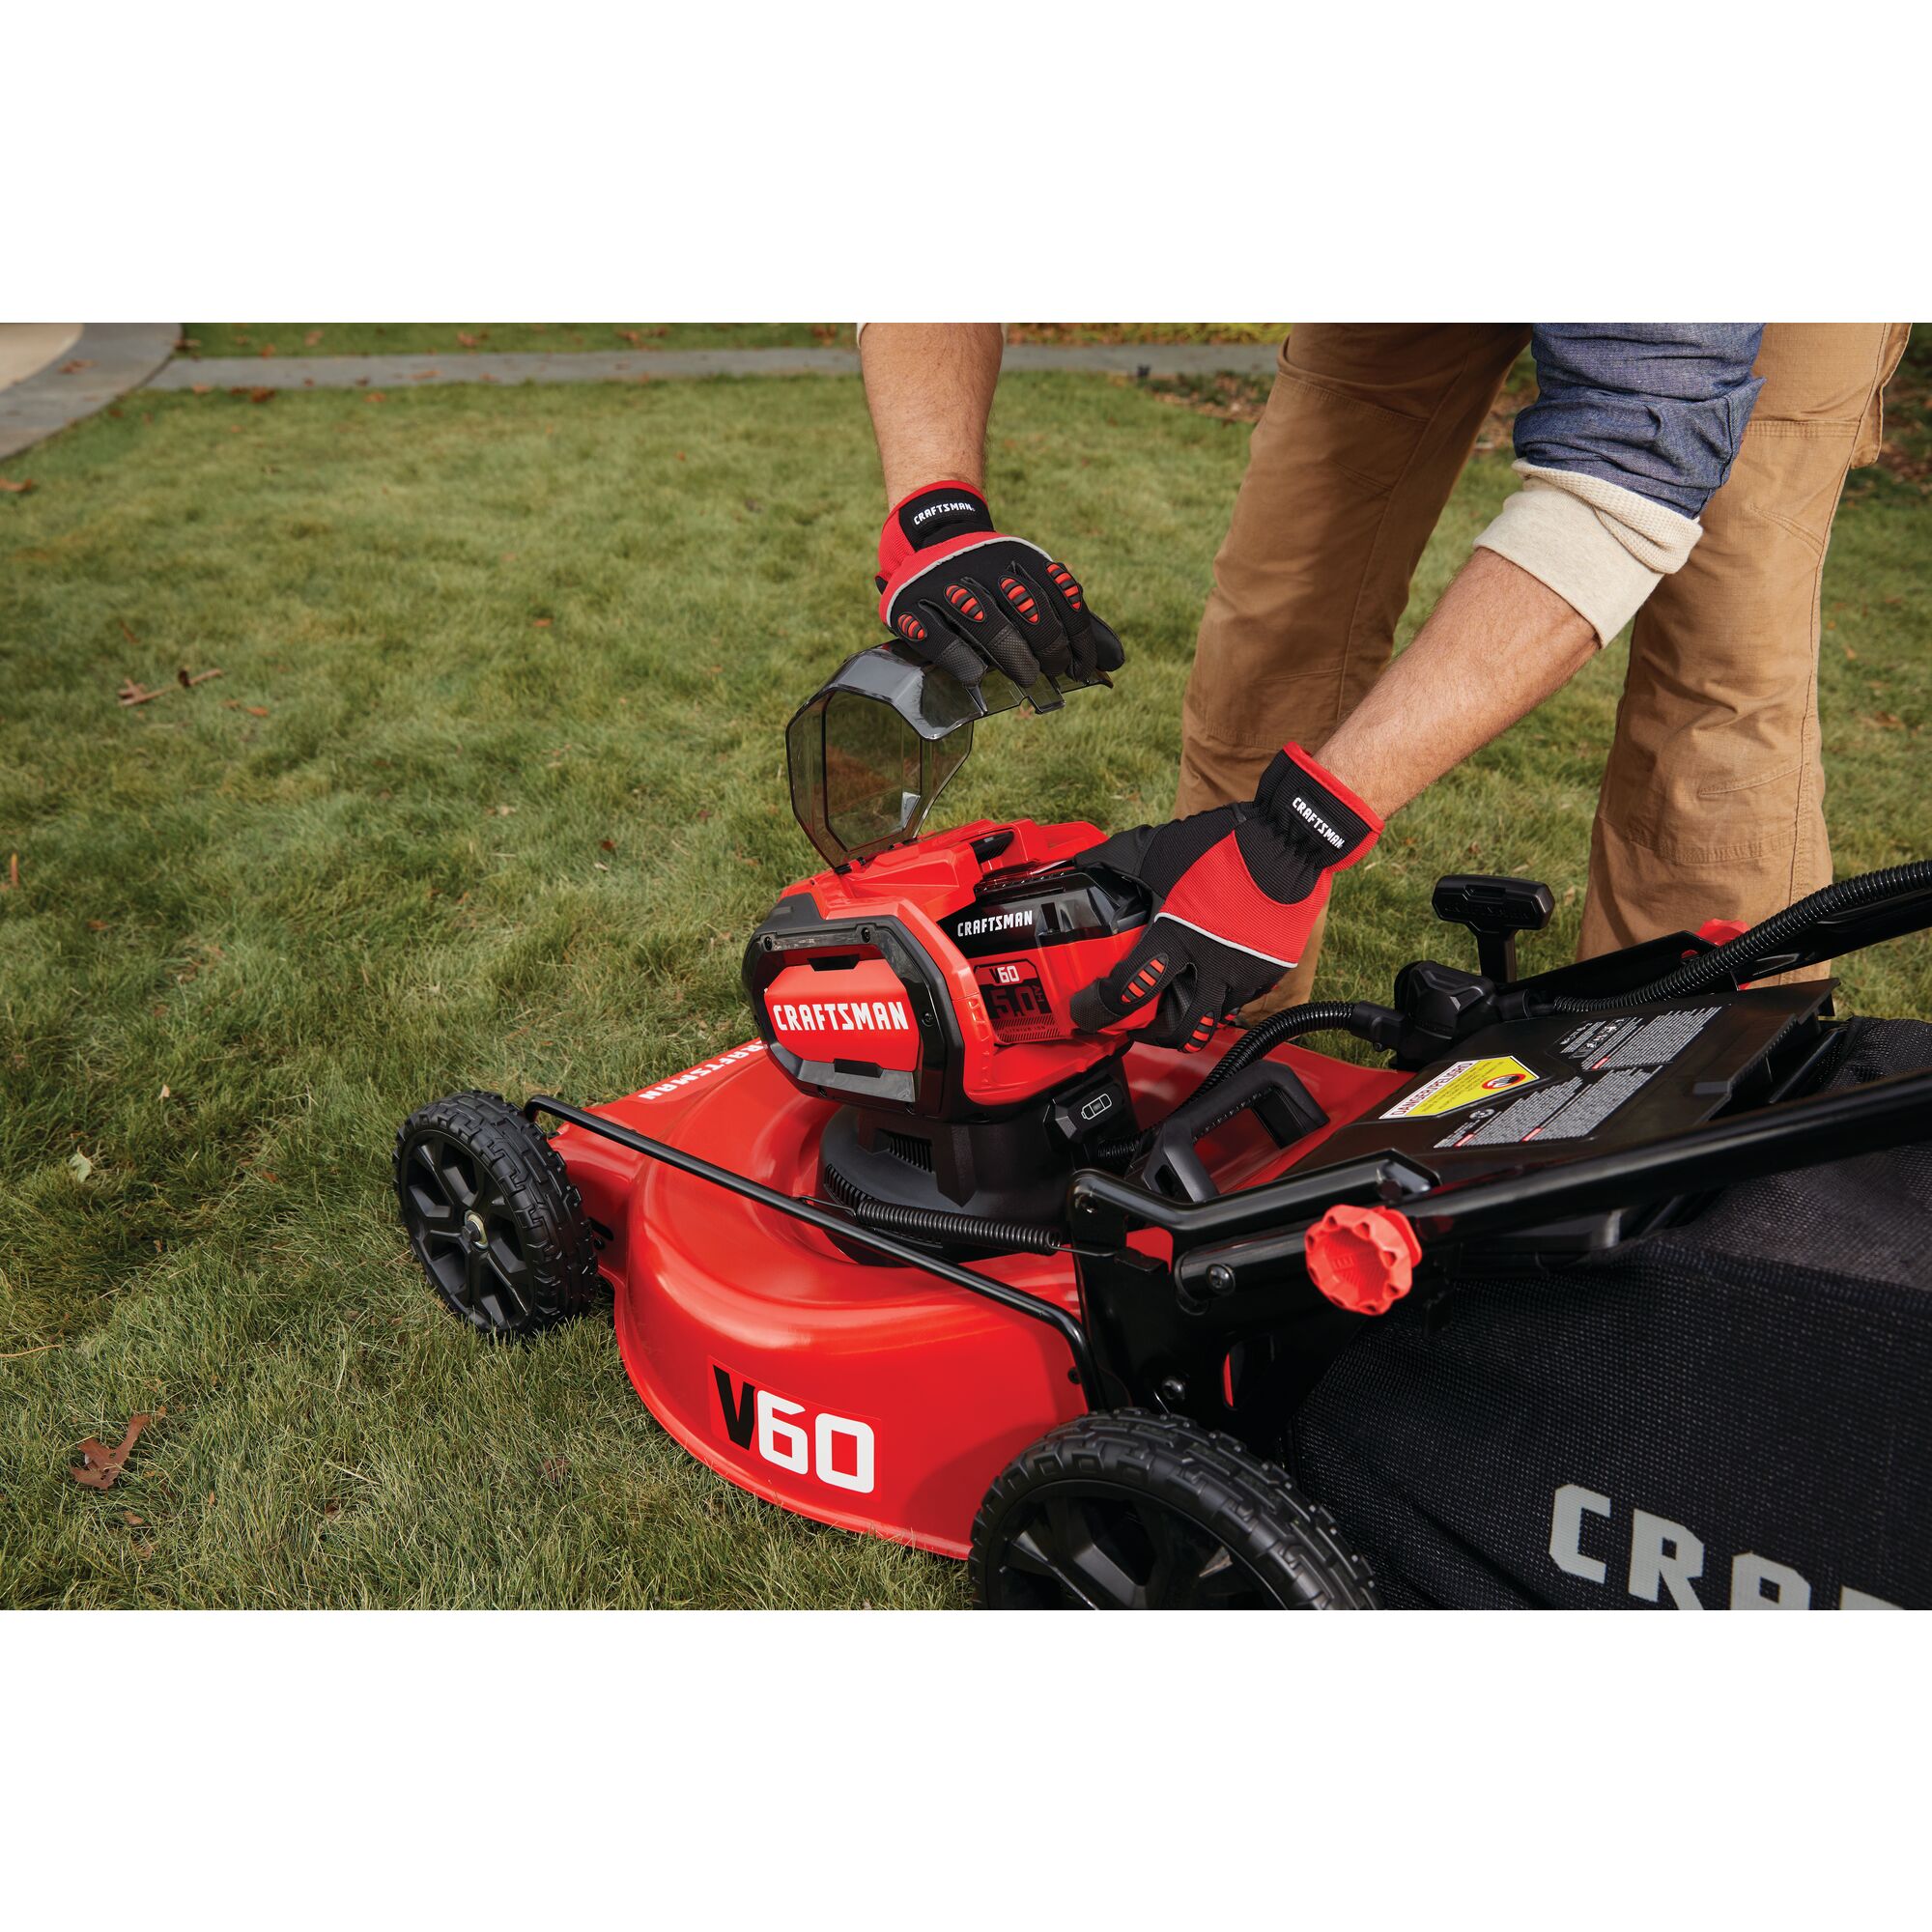 60 volt battery feature of cordless 21 inch 3 in 1 lawn mower kit 5 amp hour.